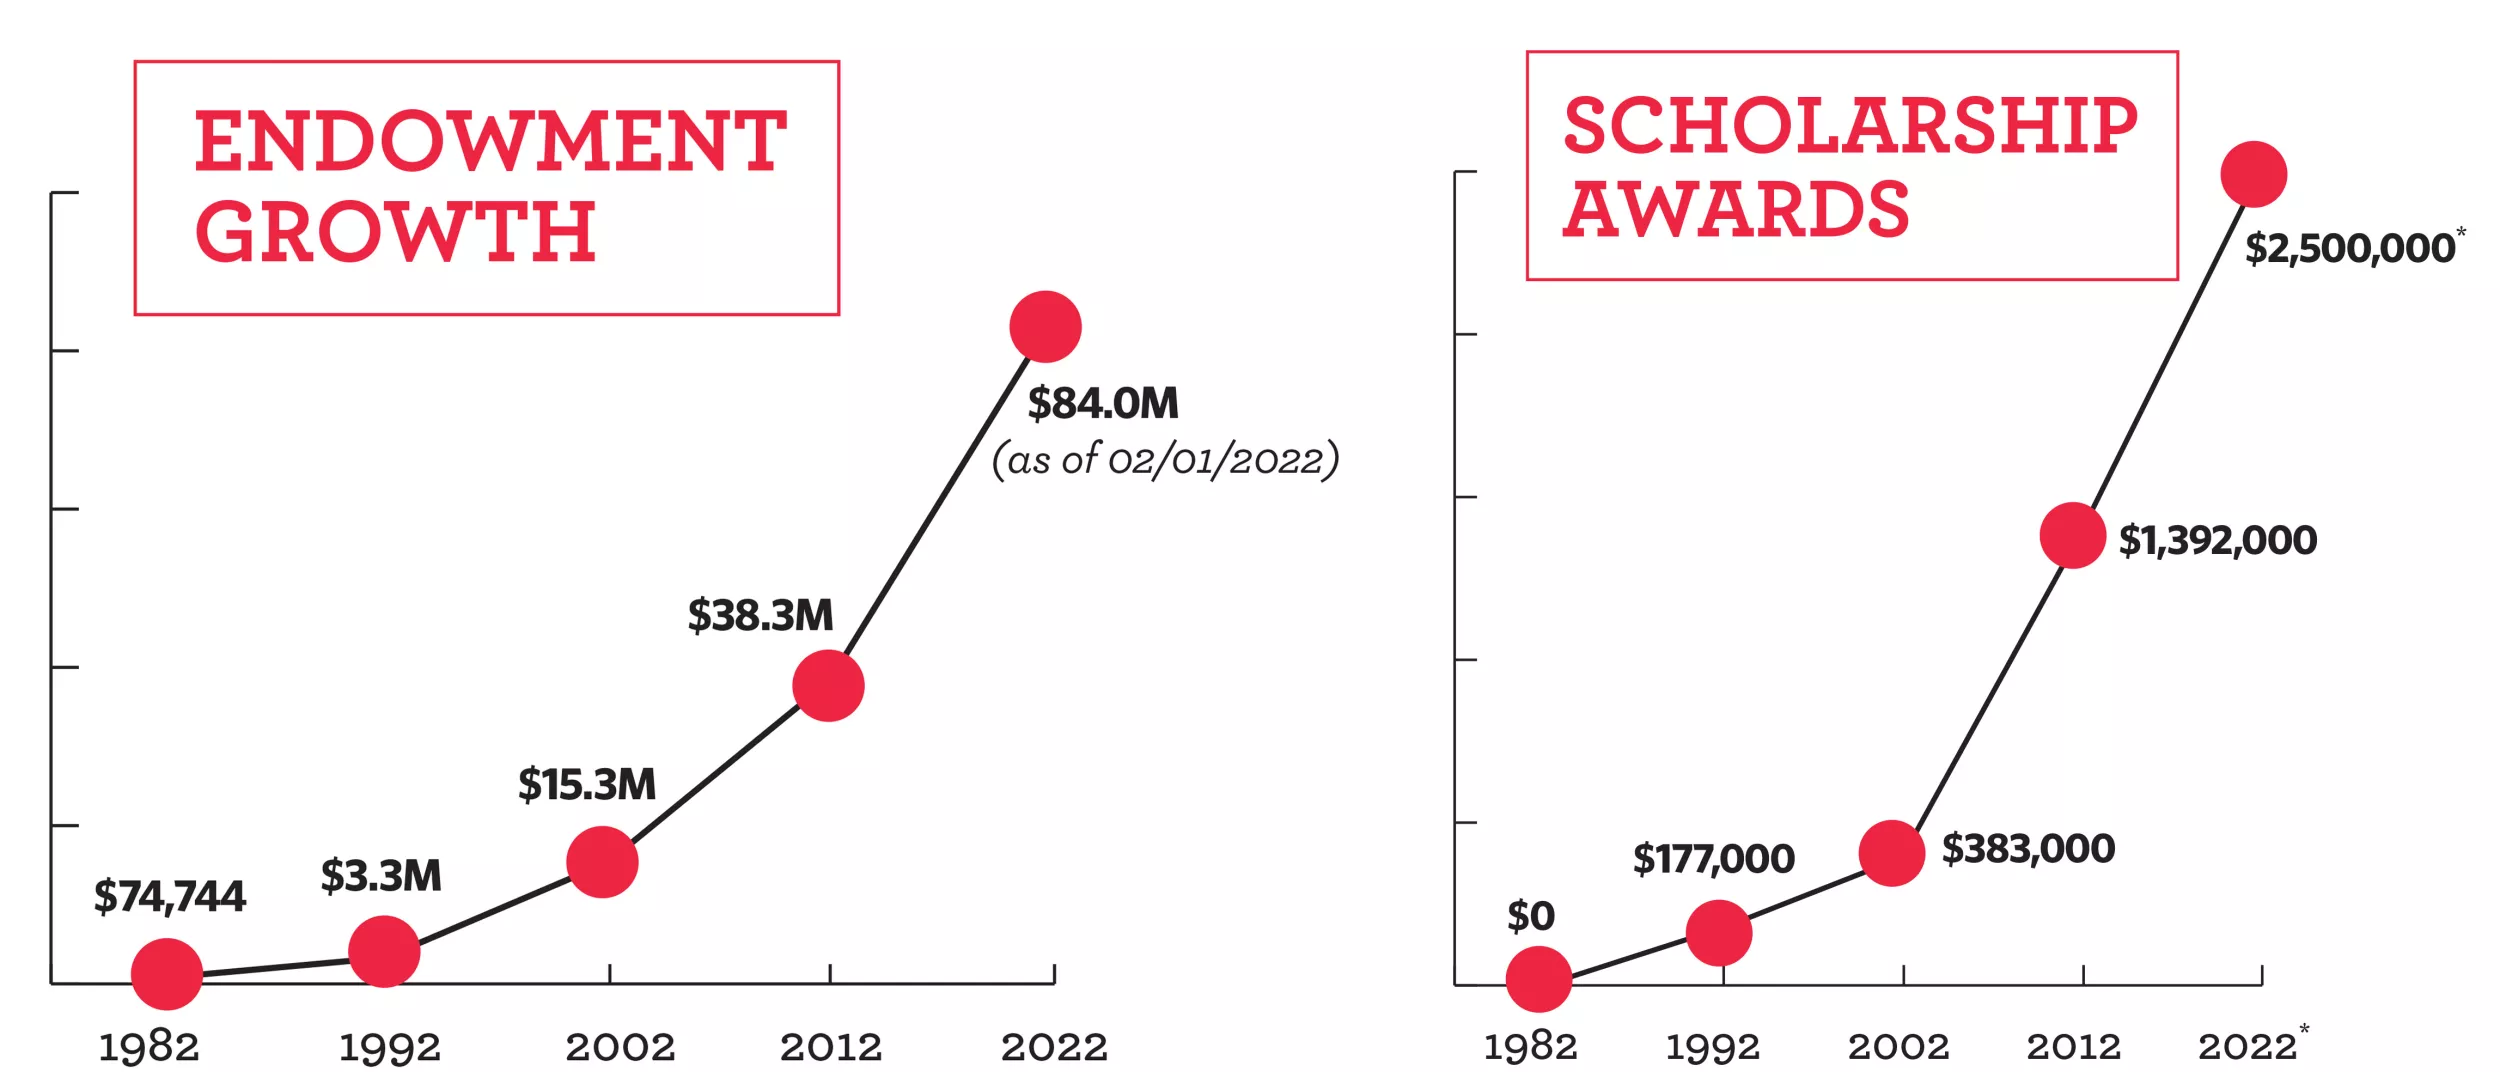 The endowment fund has grown from $74,744 in 1982 to $84,000,000 in 2022. The scholarships awards fund has grown from $0 in 1982 to $2,500,000 in 2022.